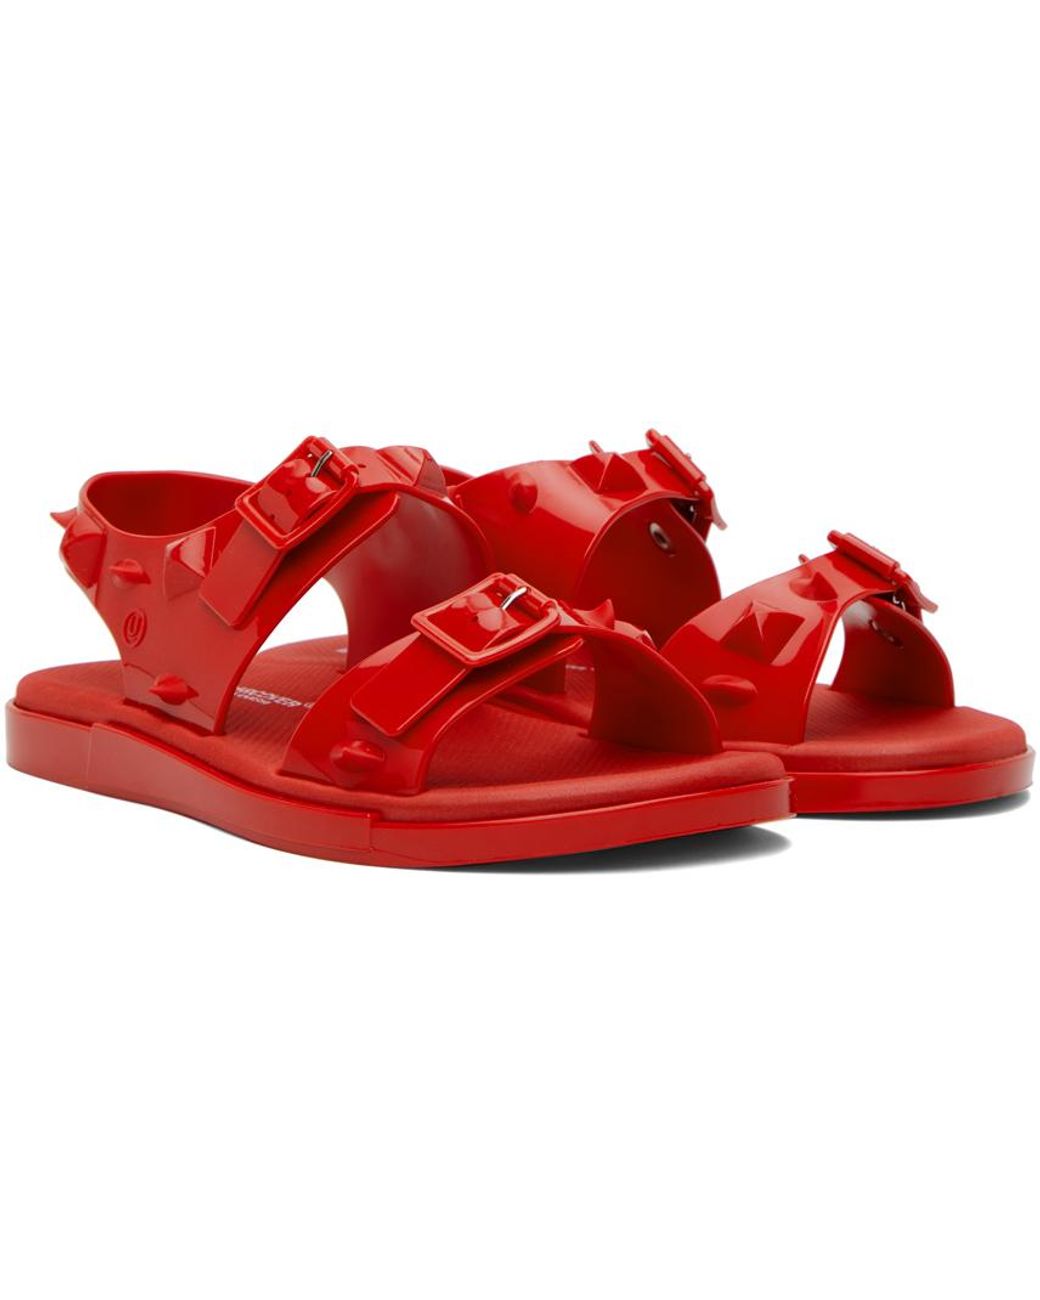 Undercover Red Melissa Edition Spikes Sandals | Lyst Canada